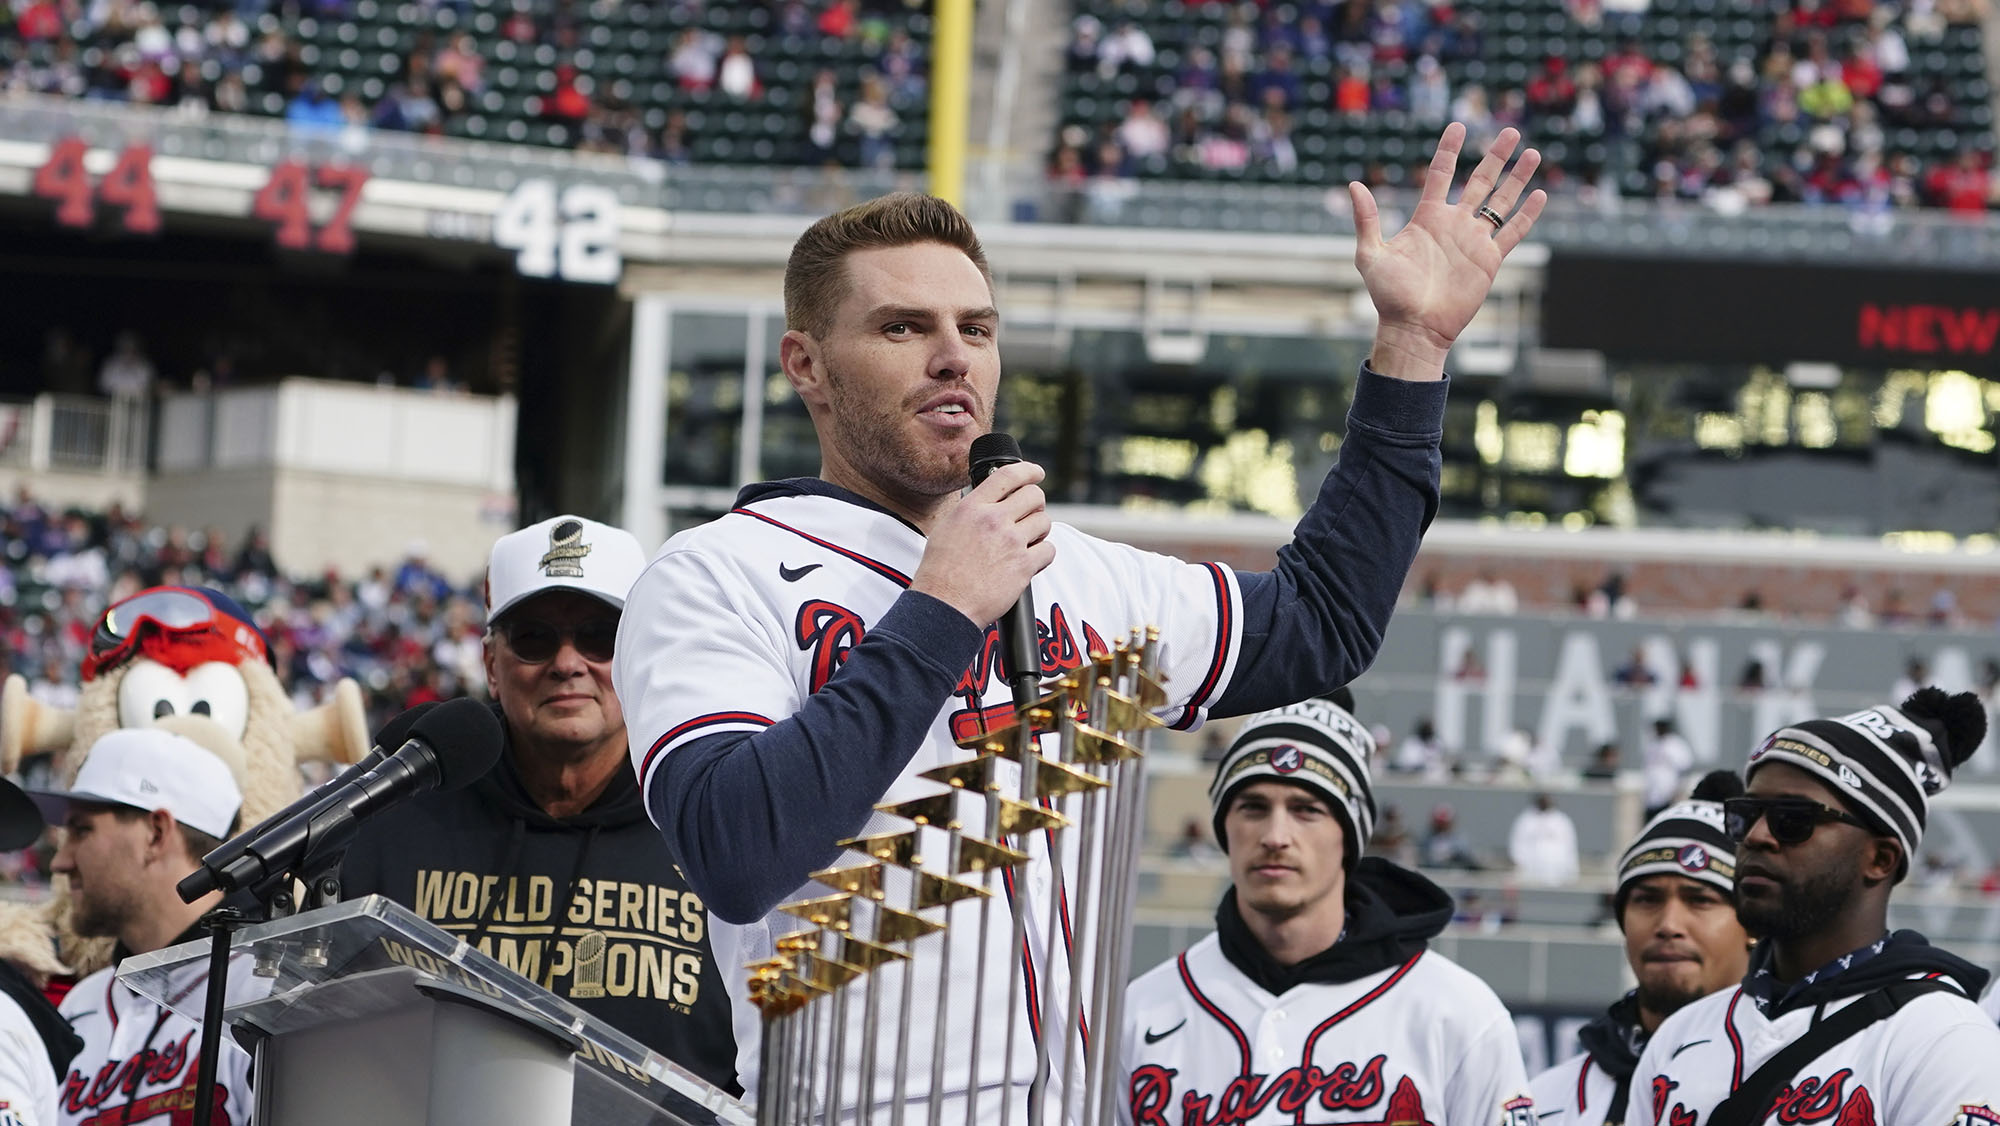 Freddie Freeman reflects on Braves' World Series win: 'I'm lost for words